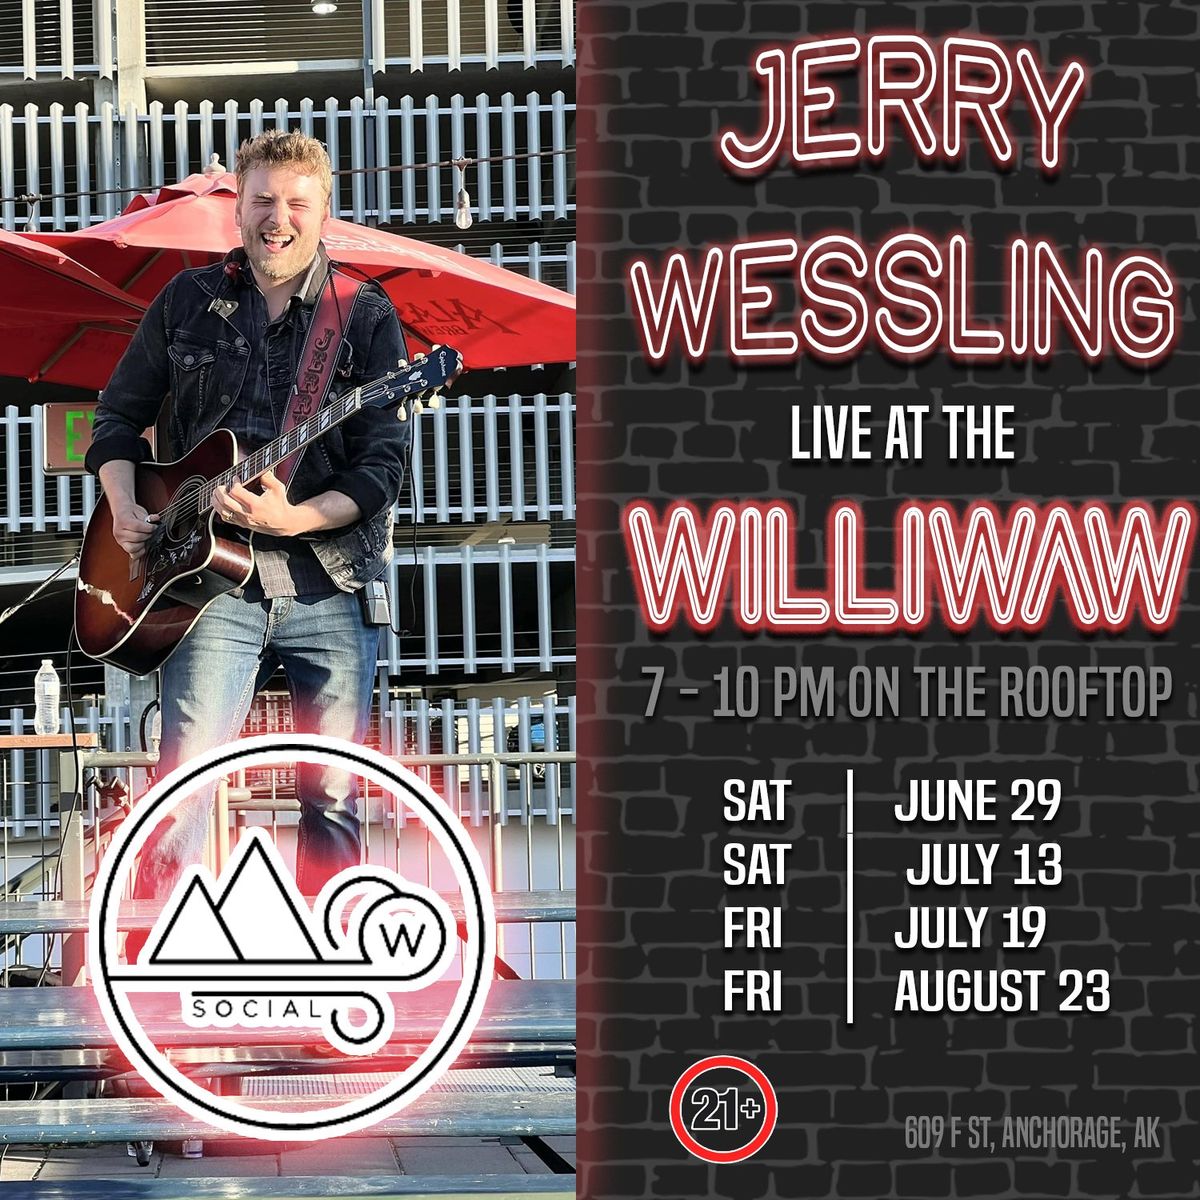 JERRY WESSLING LIVE AT THE WILLIWAW